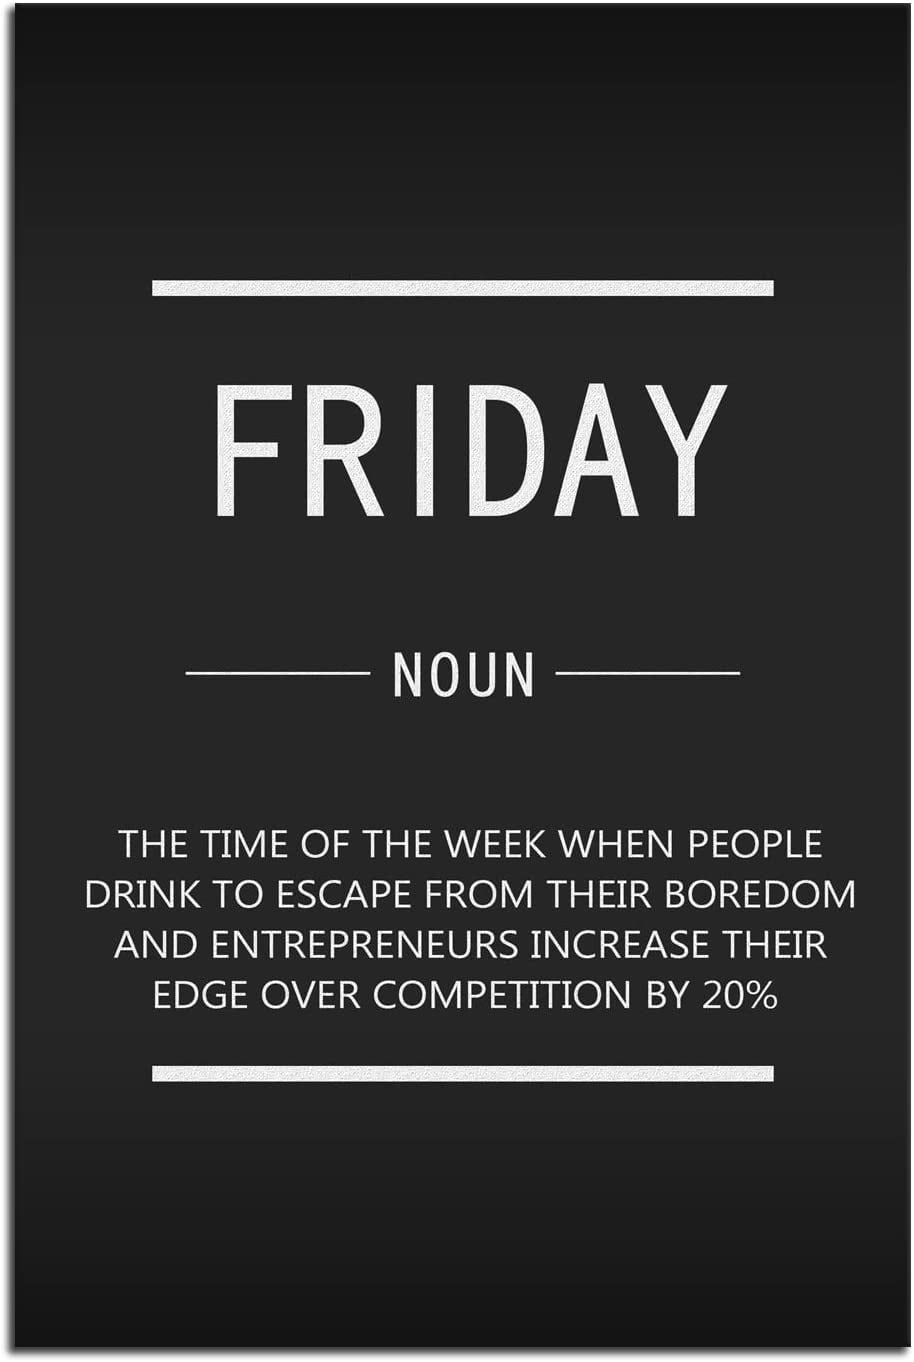 Inspirational Canvas Wall Art Friday Painting Poster Inspiring Entrepreneur  Quote Office Decoration Print Artwork Bedroom Company Stretch Frame Ready  to Hang12x18